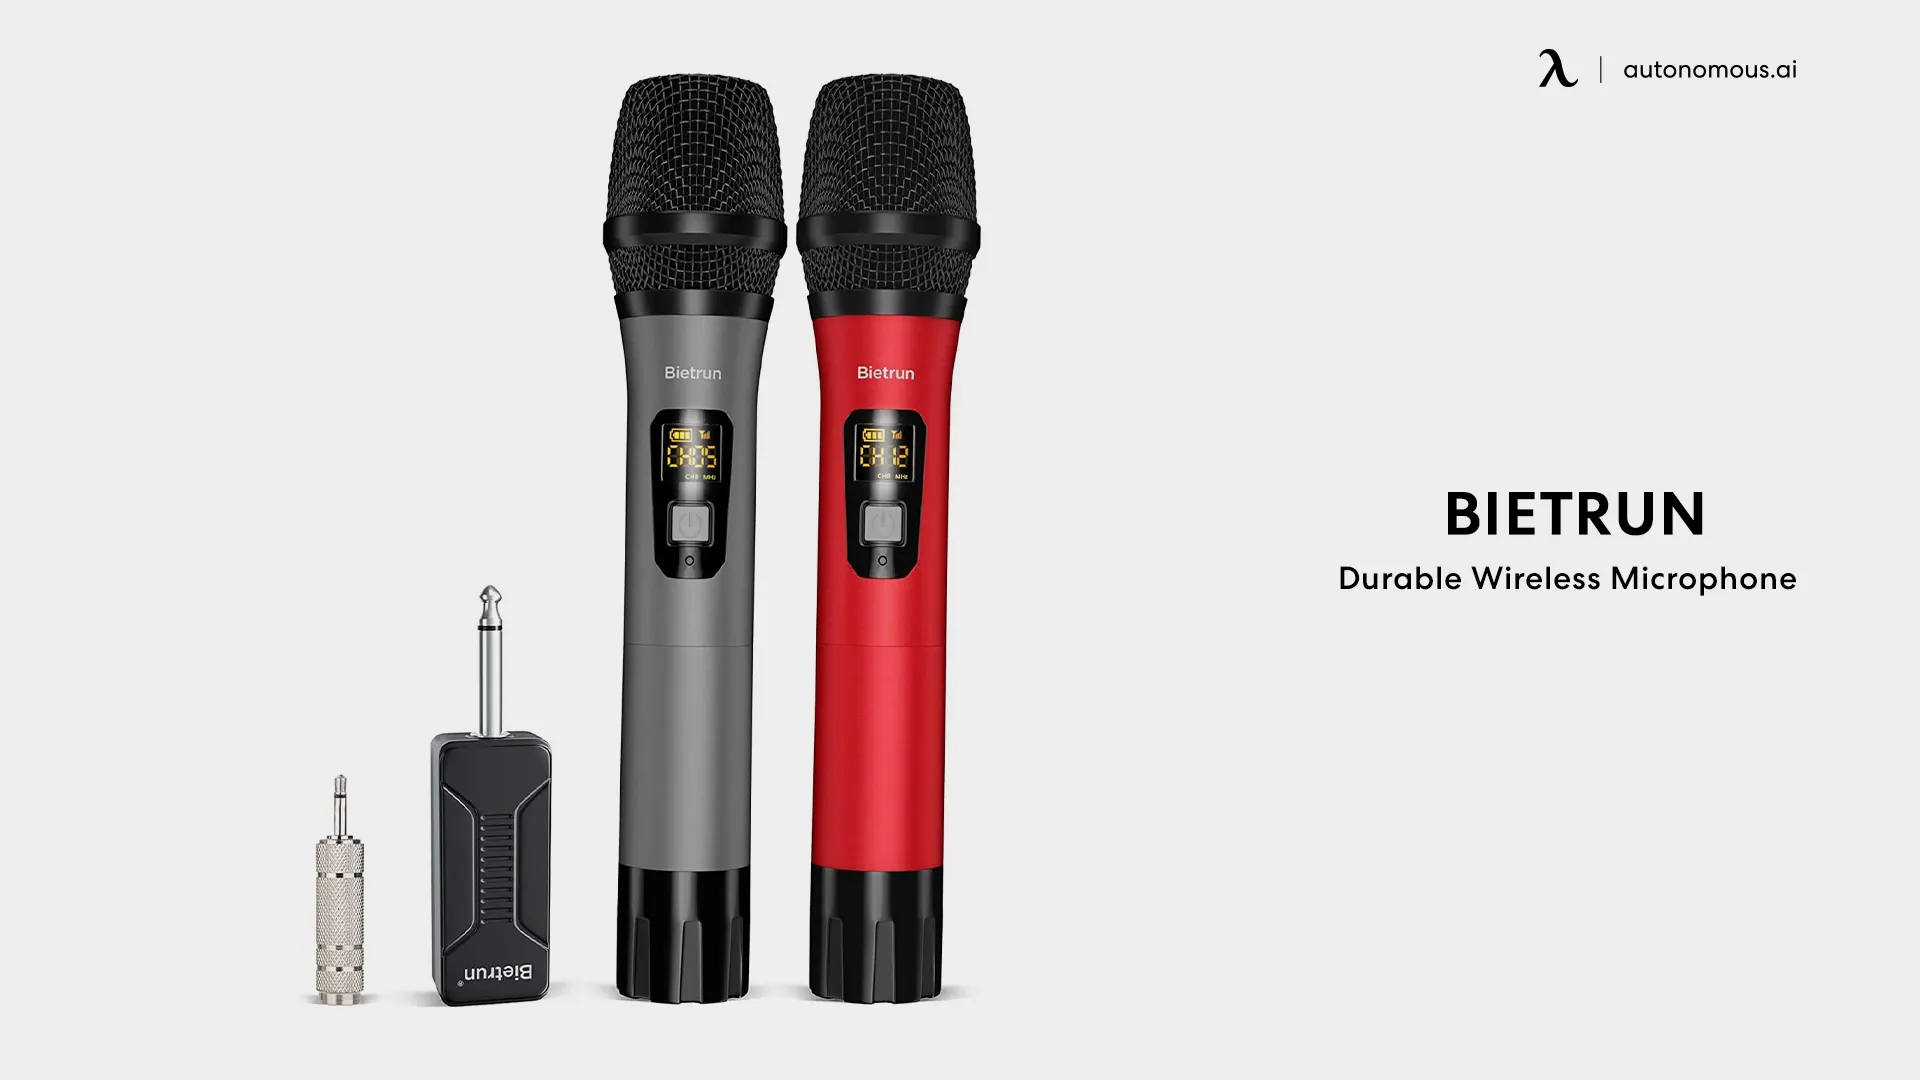 Durable Wireless Microphone by Bietrun